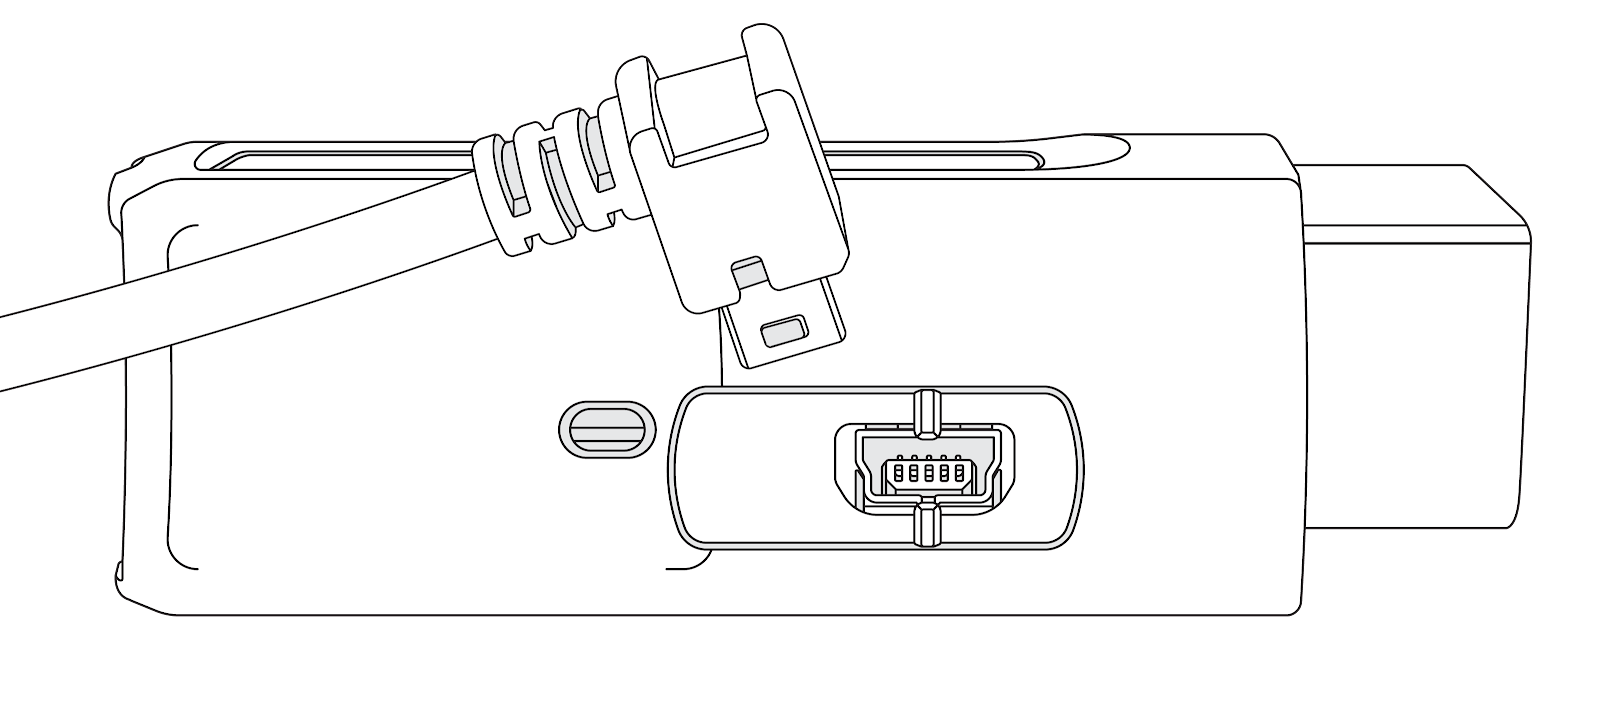 Line drawing of IOX USB connector being plugged in to GO device